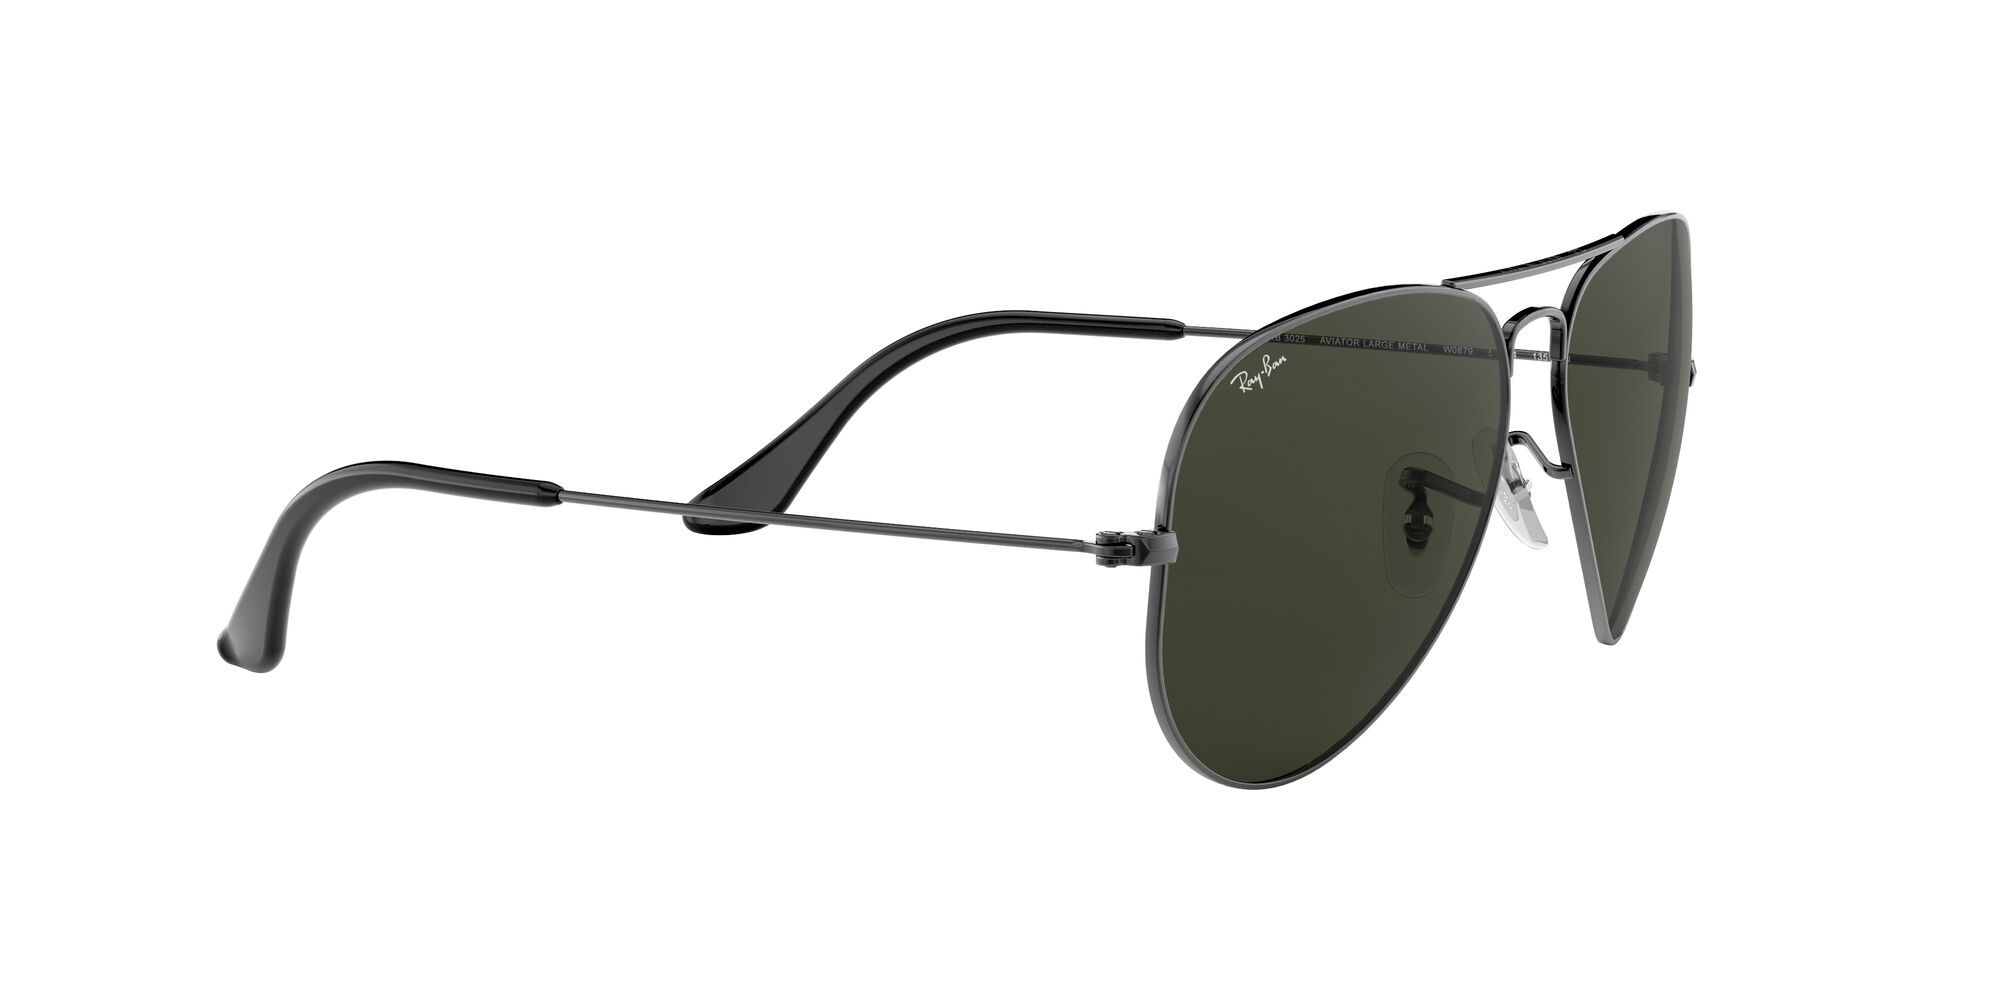 Ray-Ban RB3025 Classic Adult Sunglasses - image 4 of 12